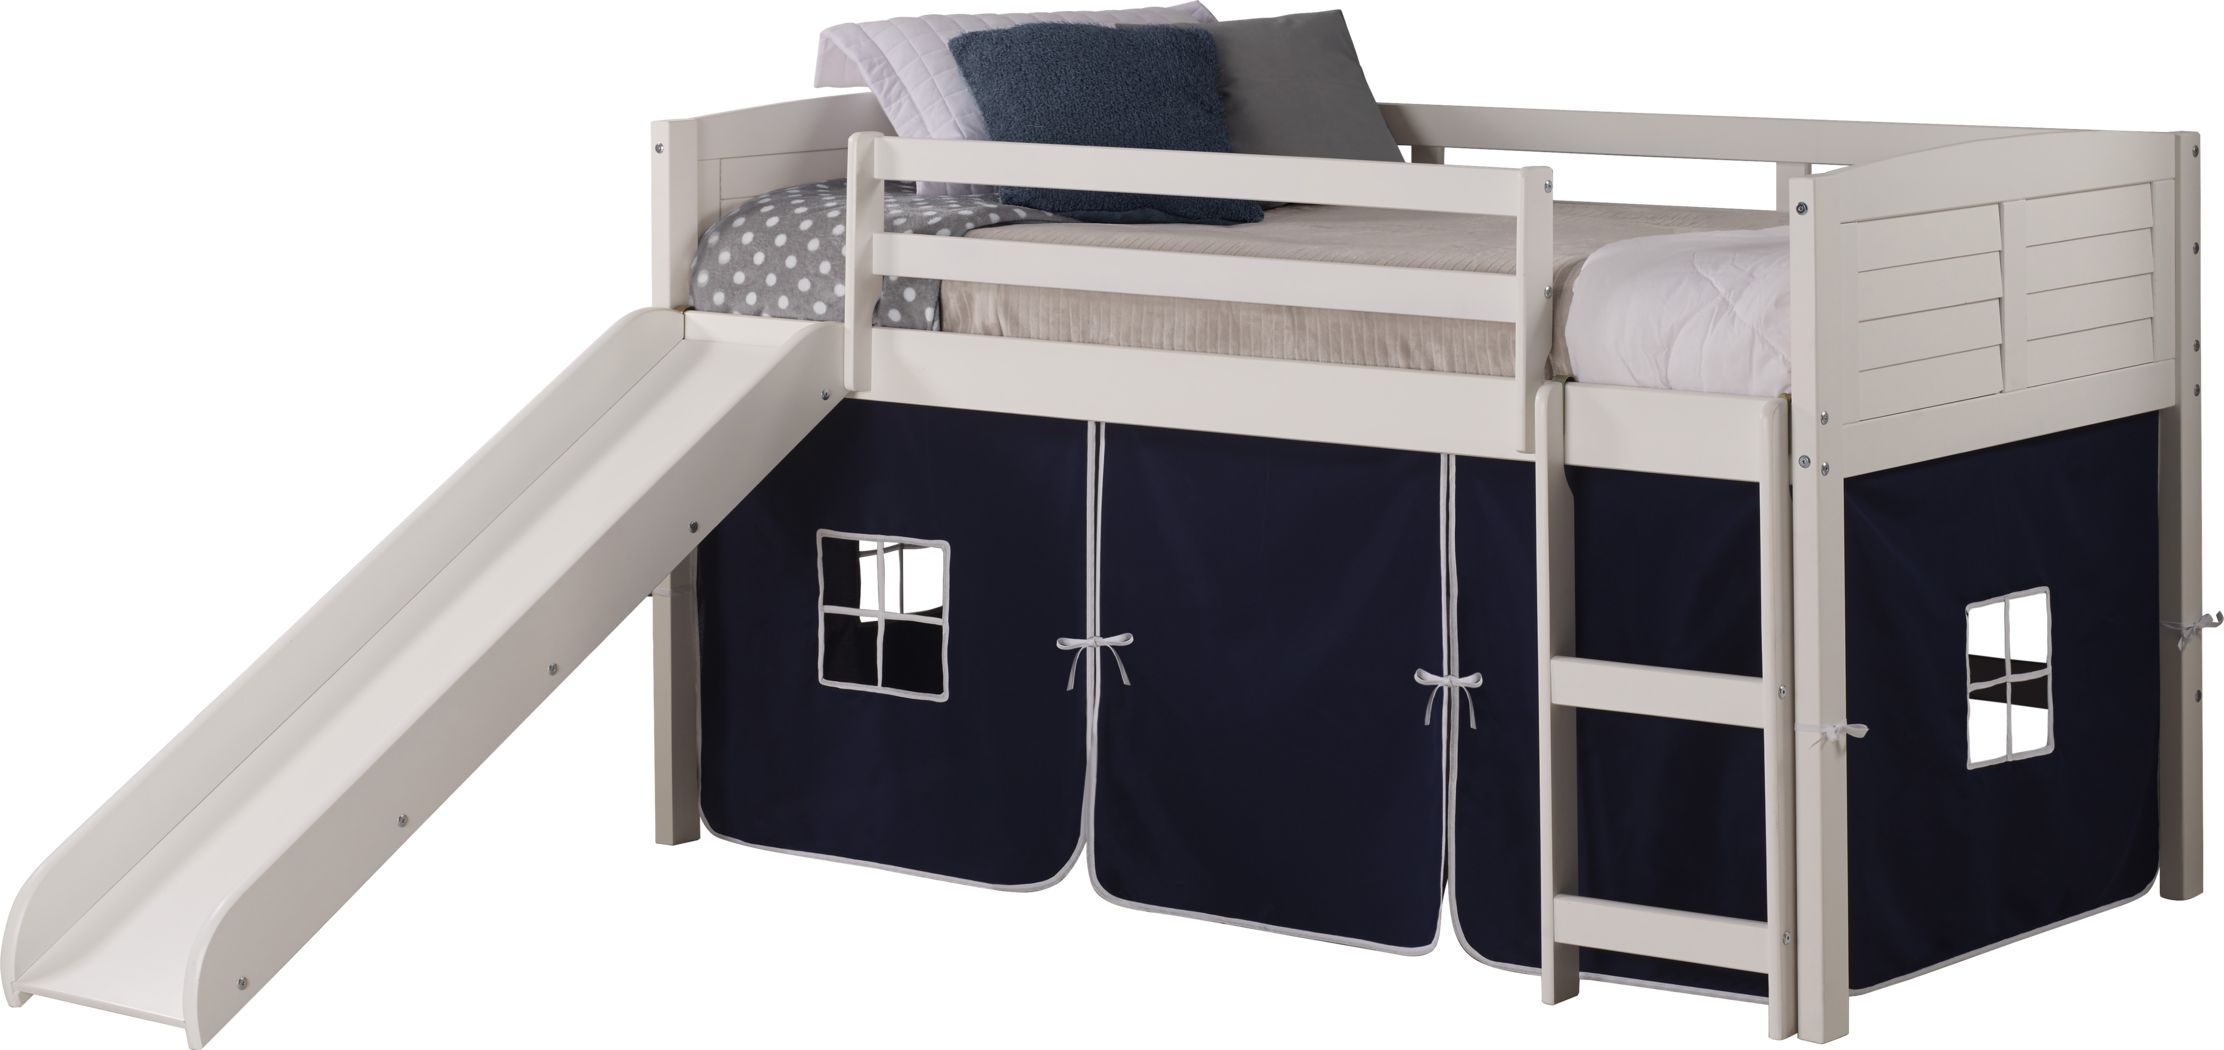 Kids Twin Bed With Slide Free Delivery, Boys Twin Loft Bed With Slide